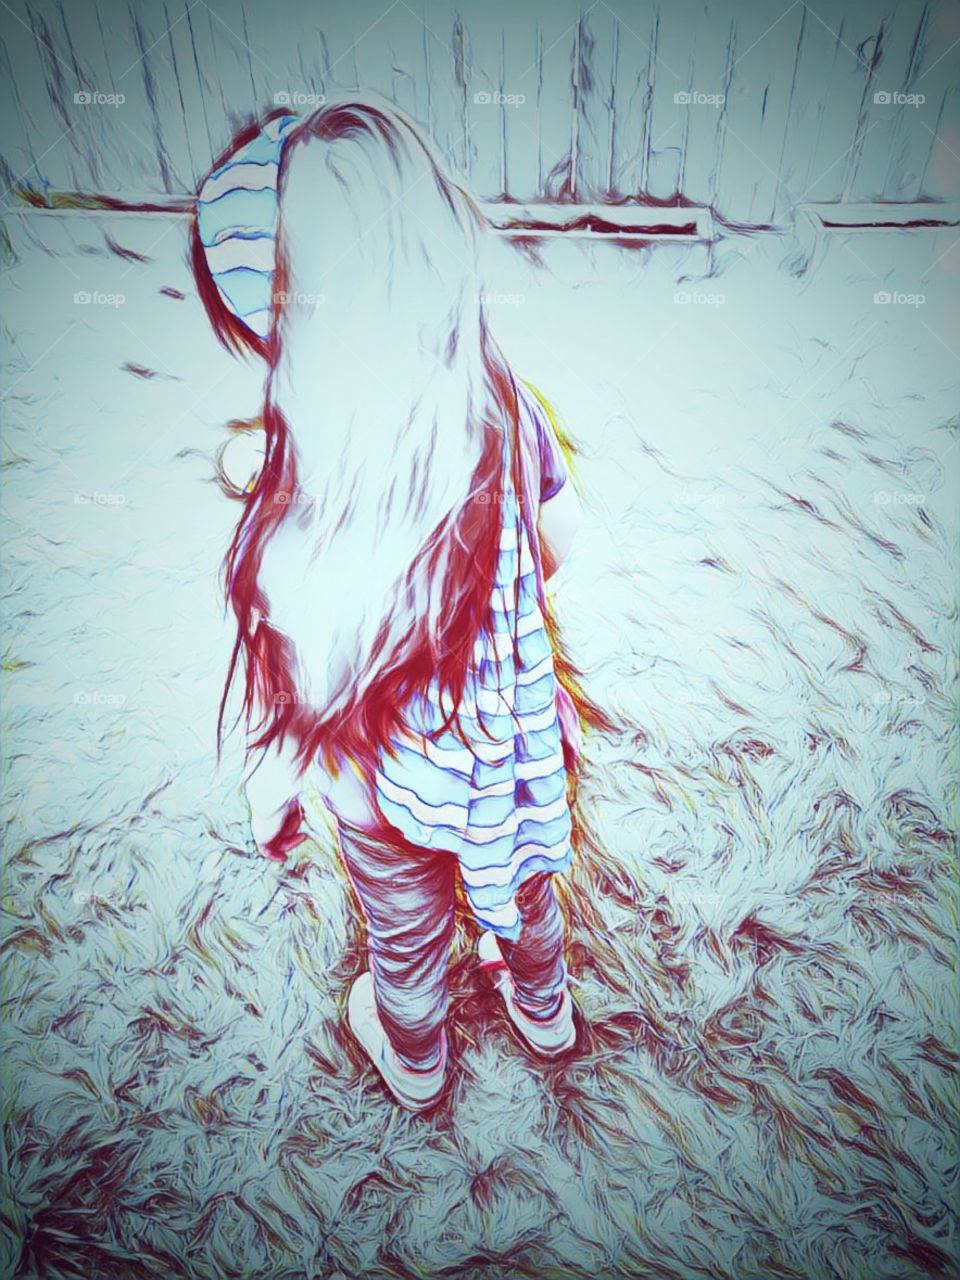 Sketch style photo of whimsical, long haired little girl with blue and white striped scarf falling down her back.